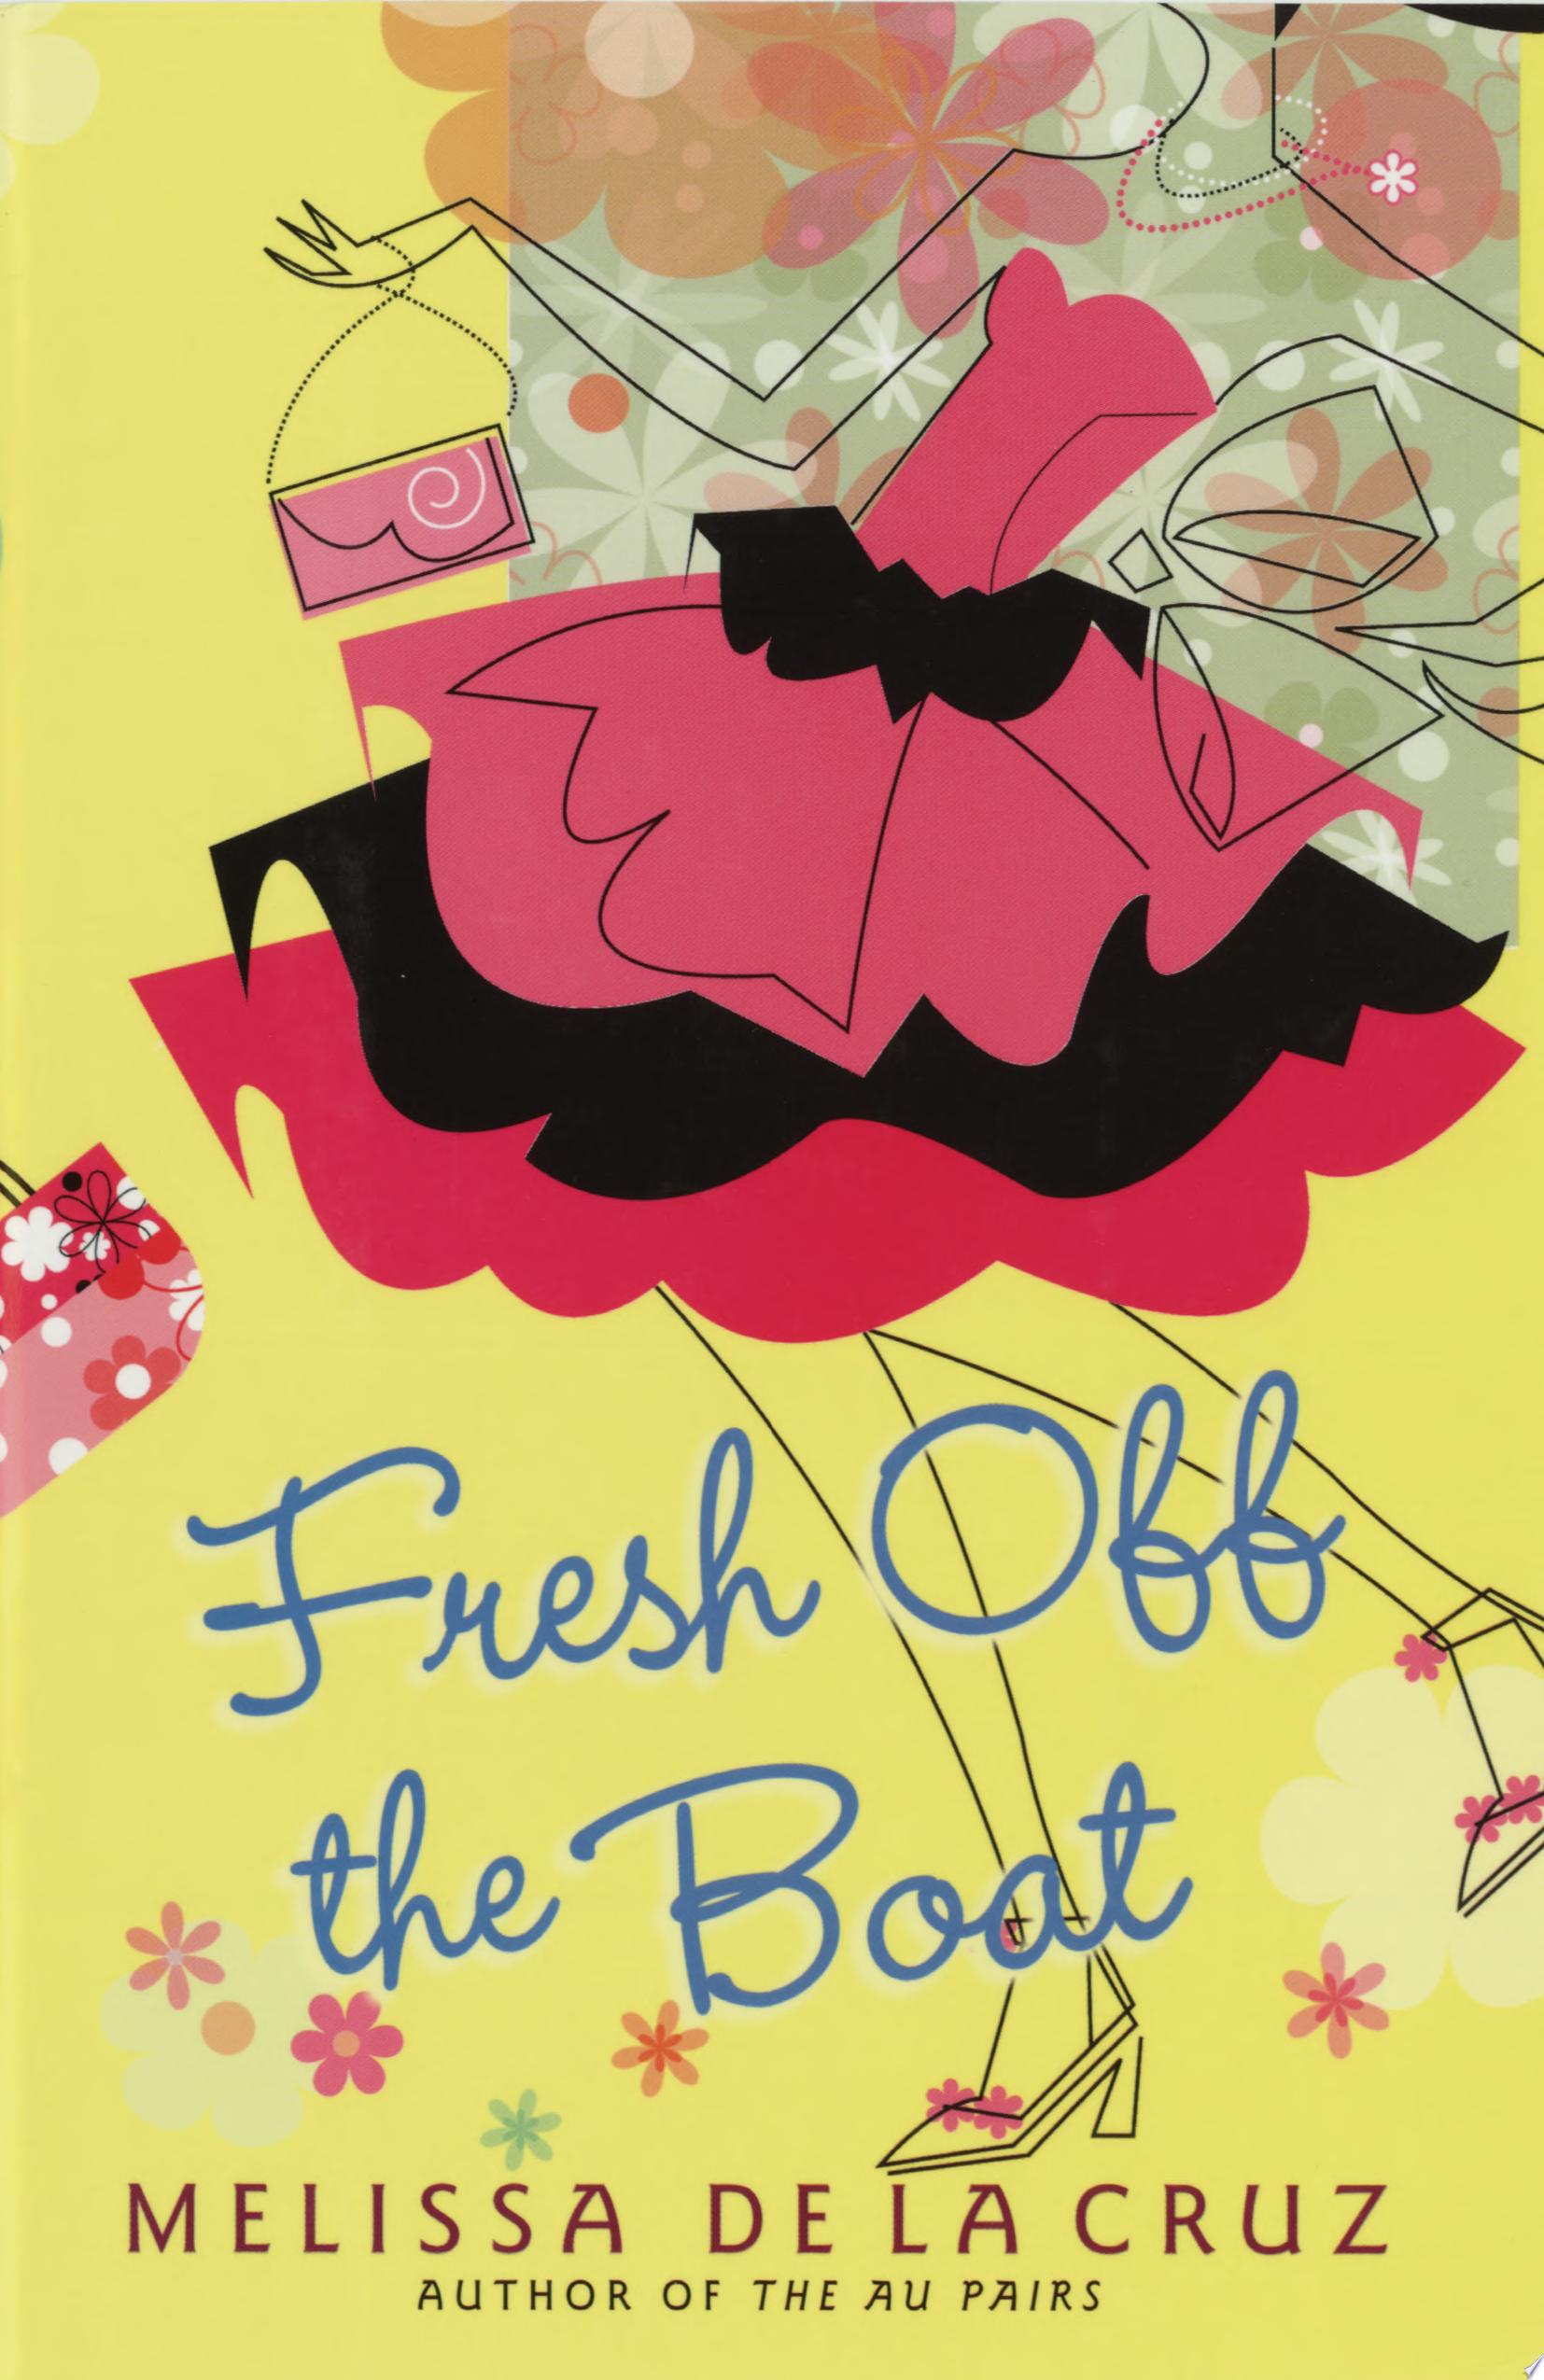 Image for "Fresh Off the Boat"